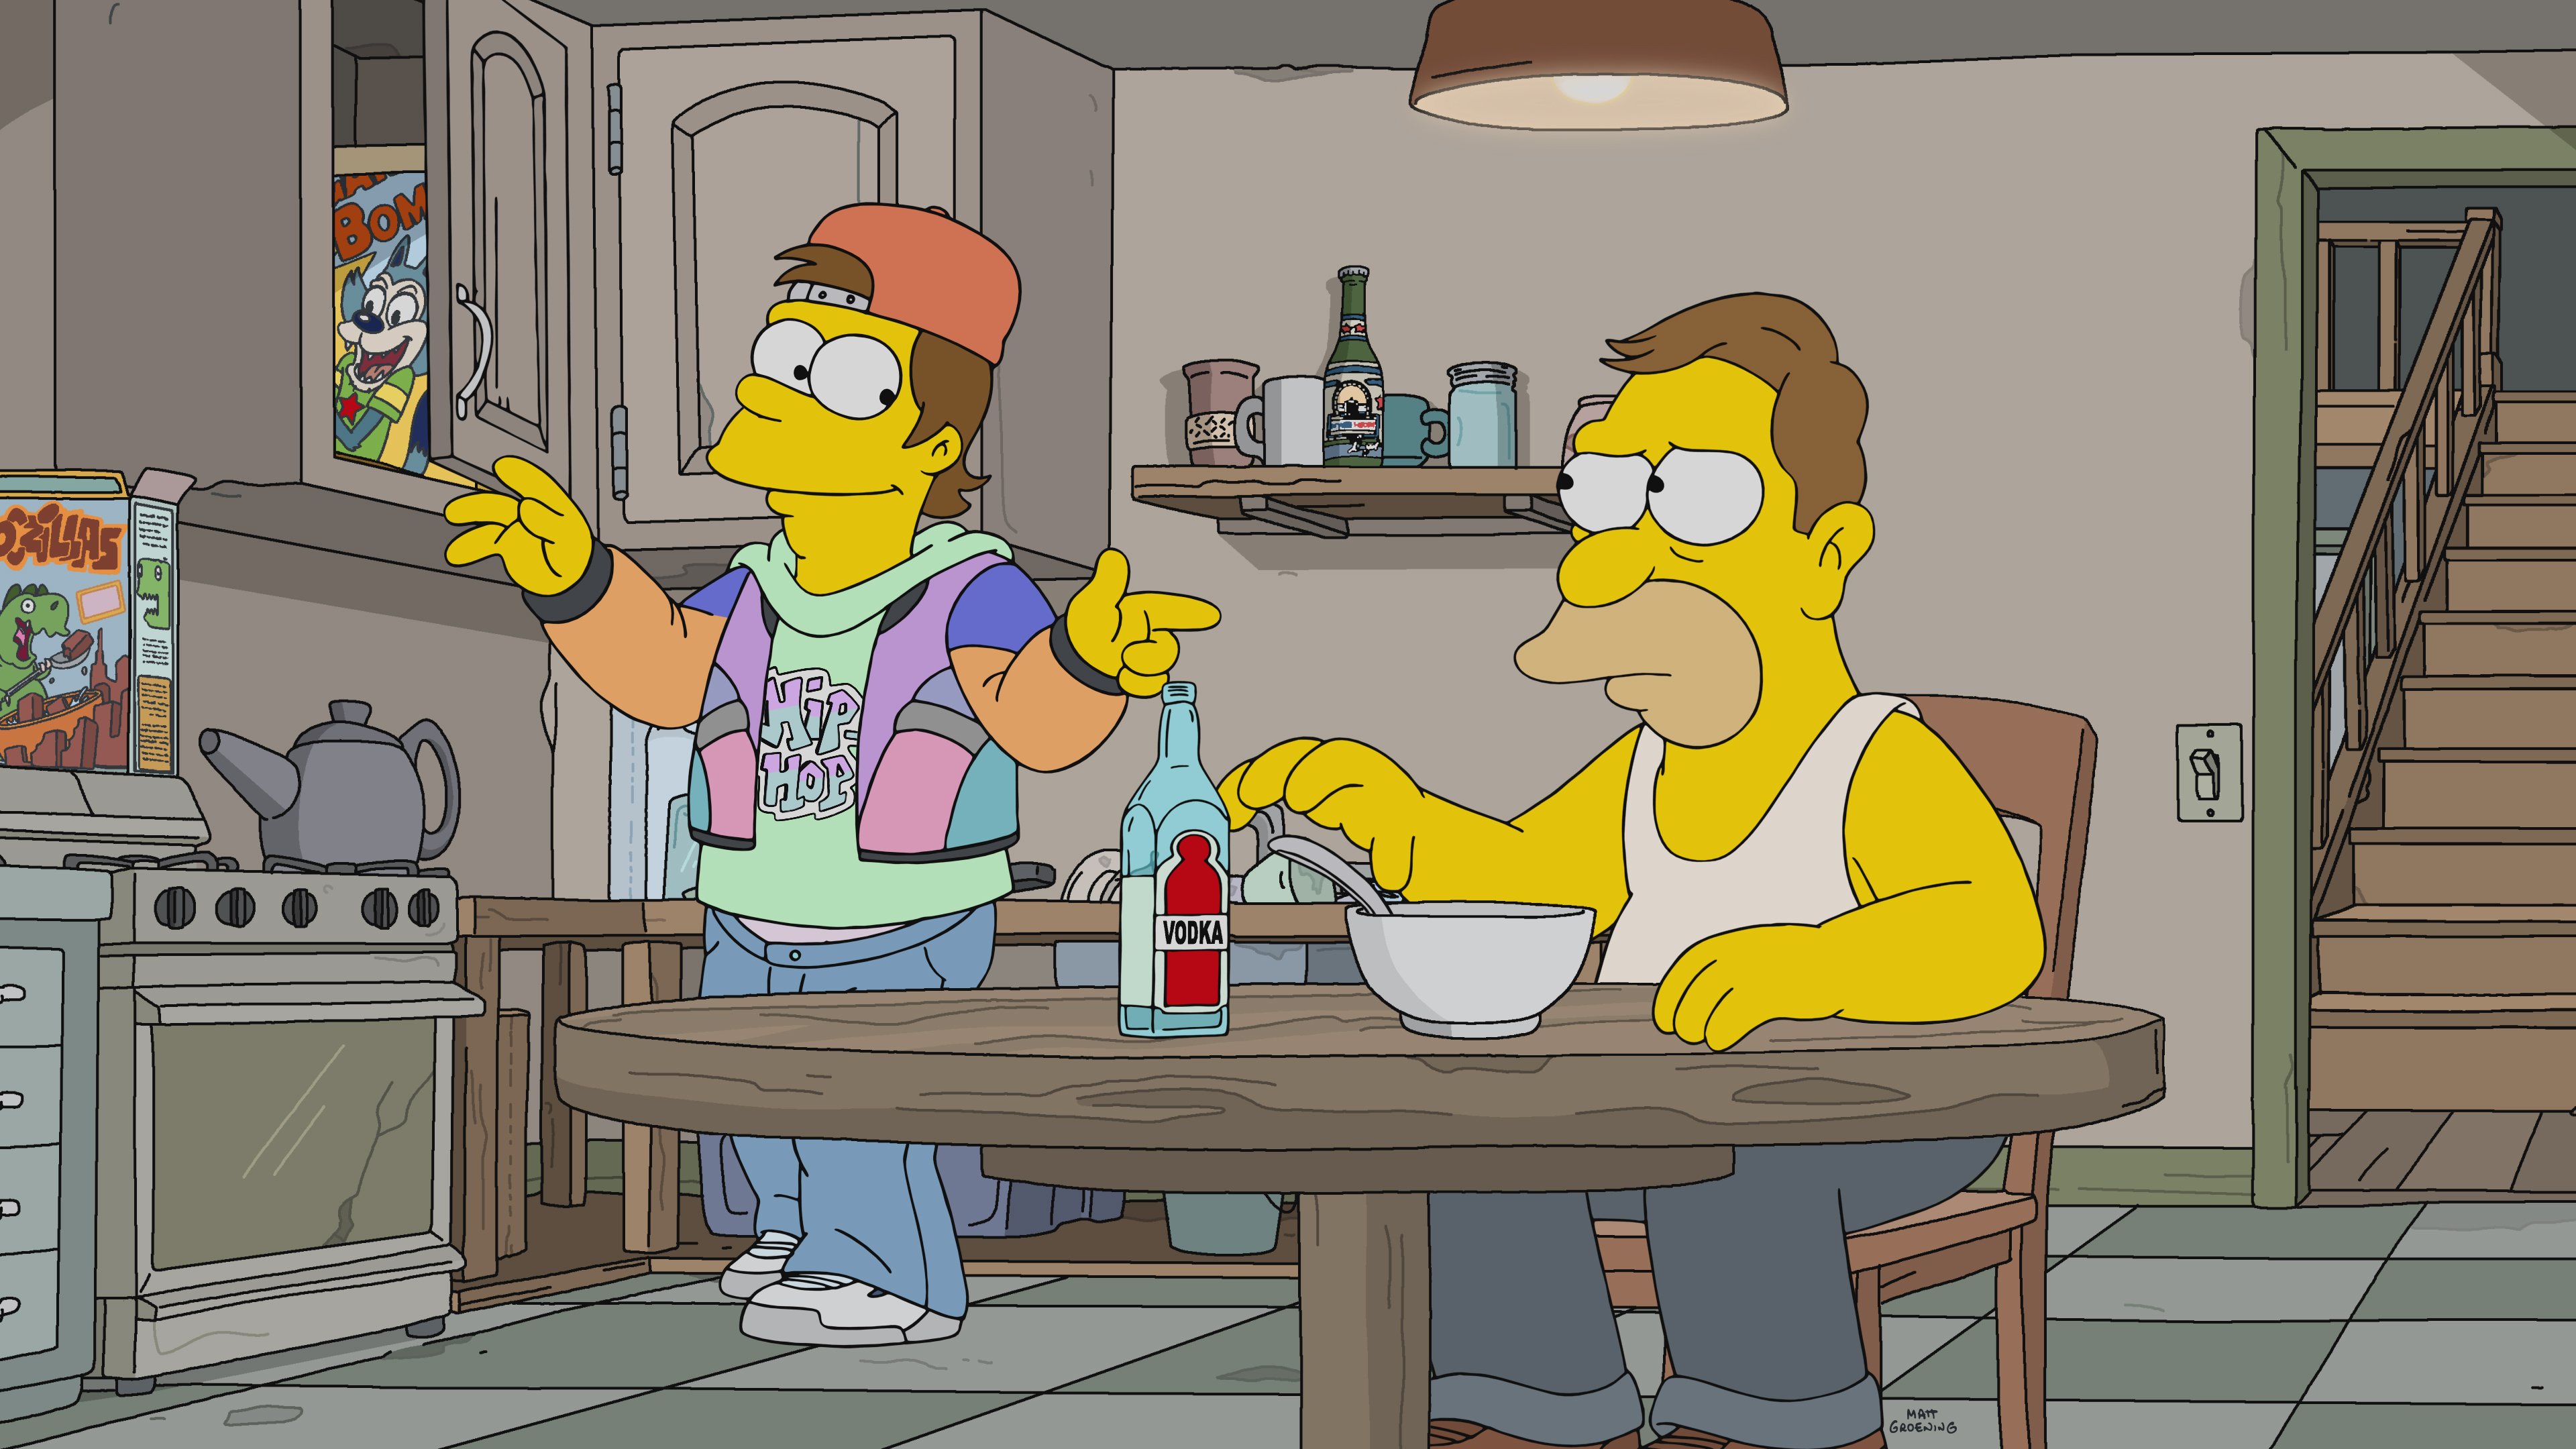 The Simpsons -Homer and Grandpa Simpson stuck in the '90s